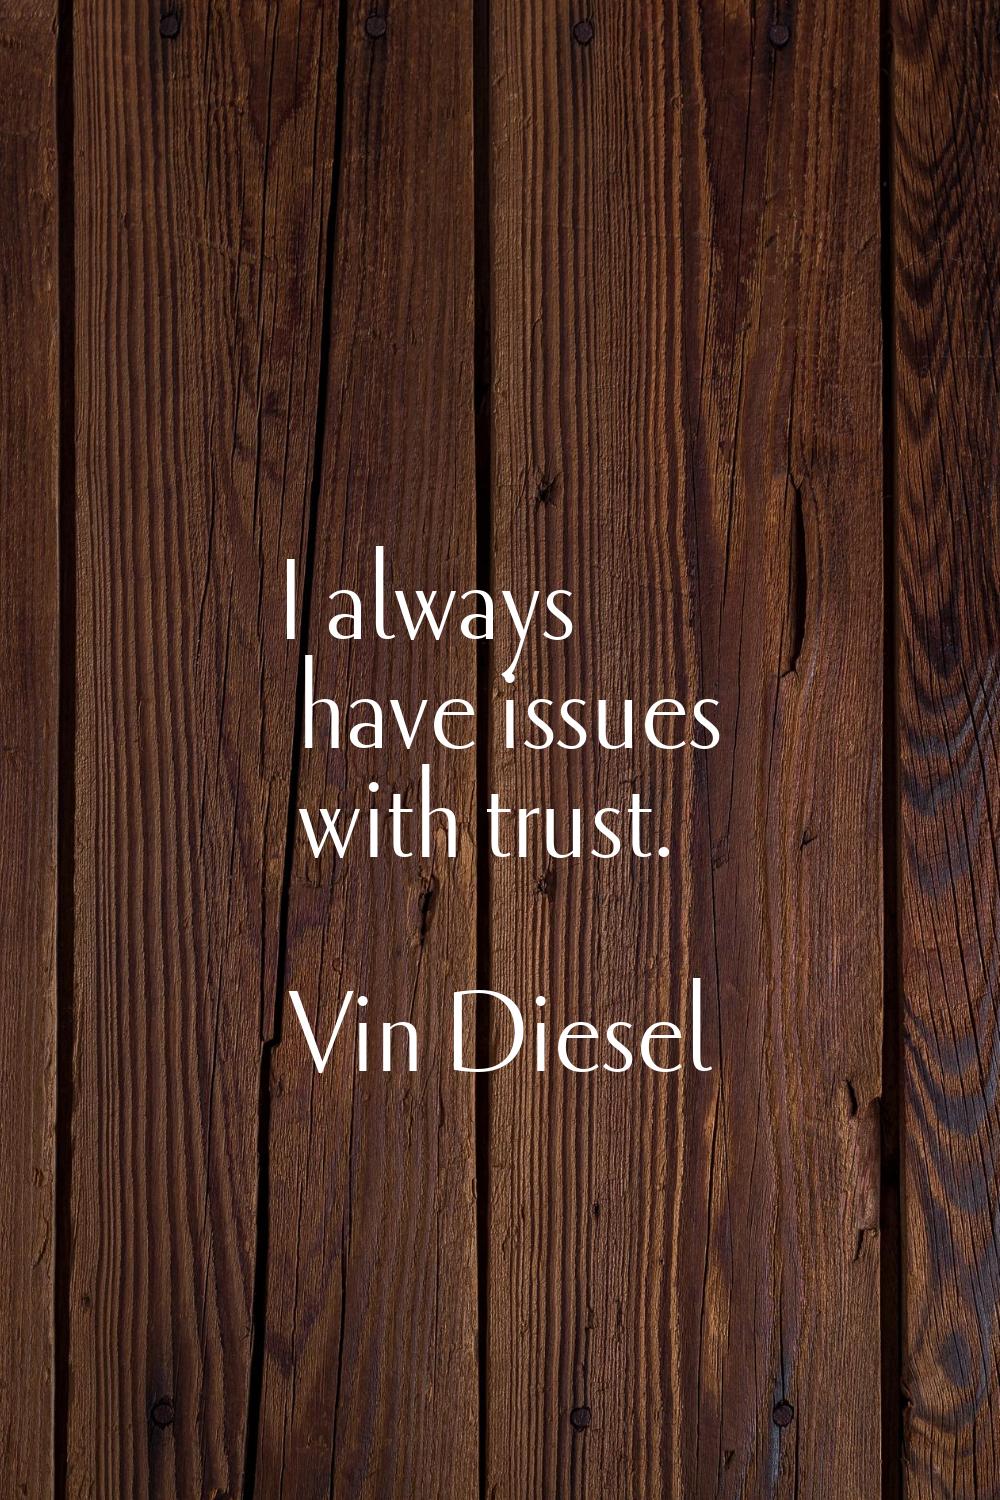 I always have issues with trust.